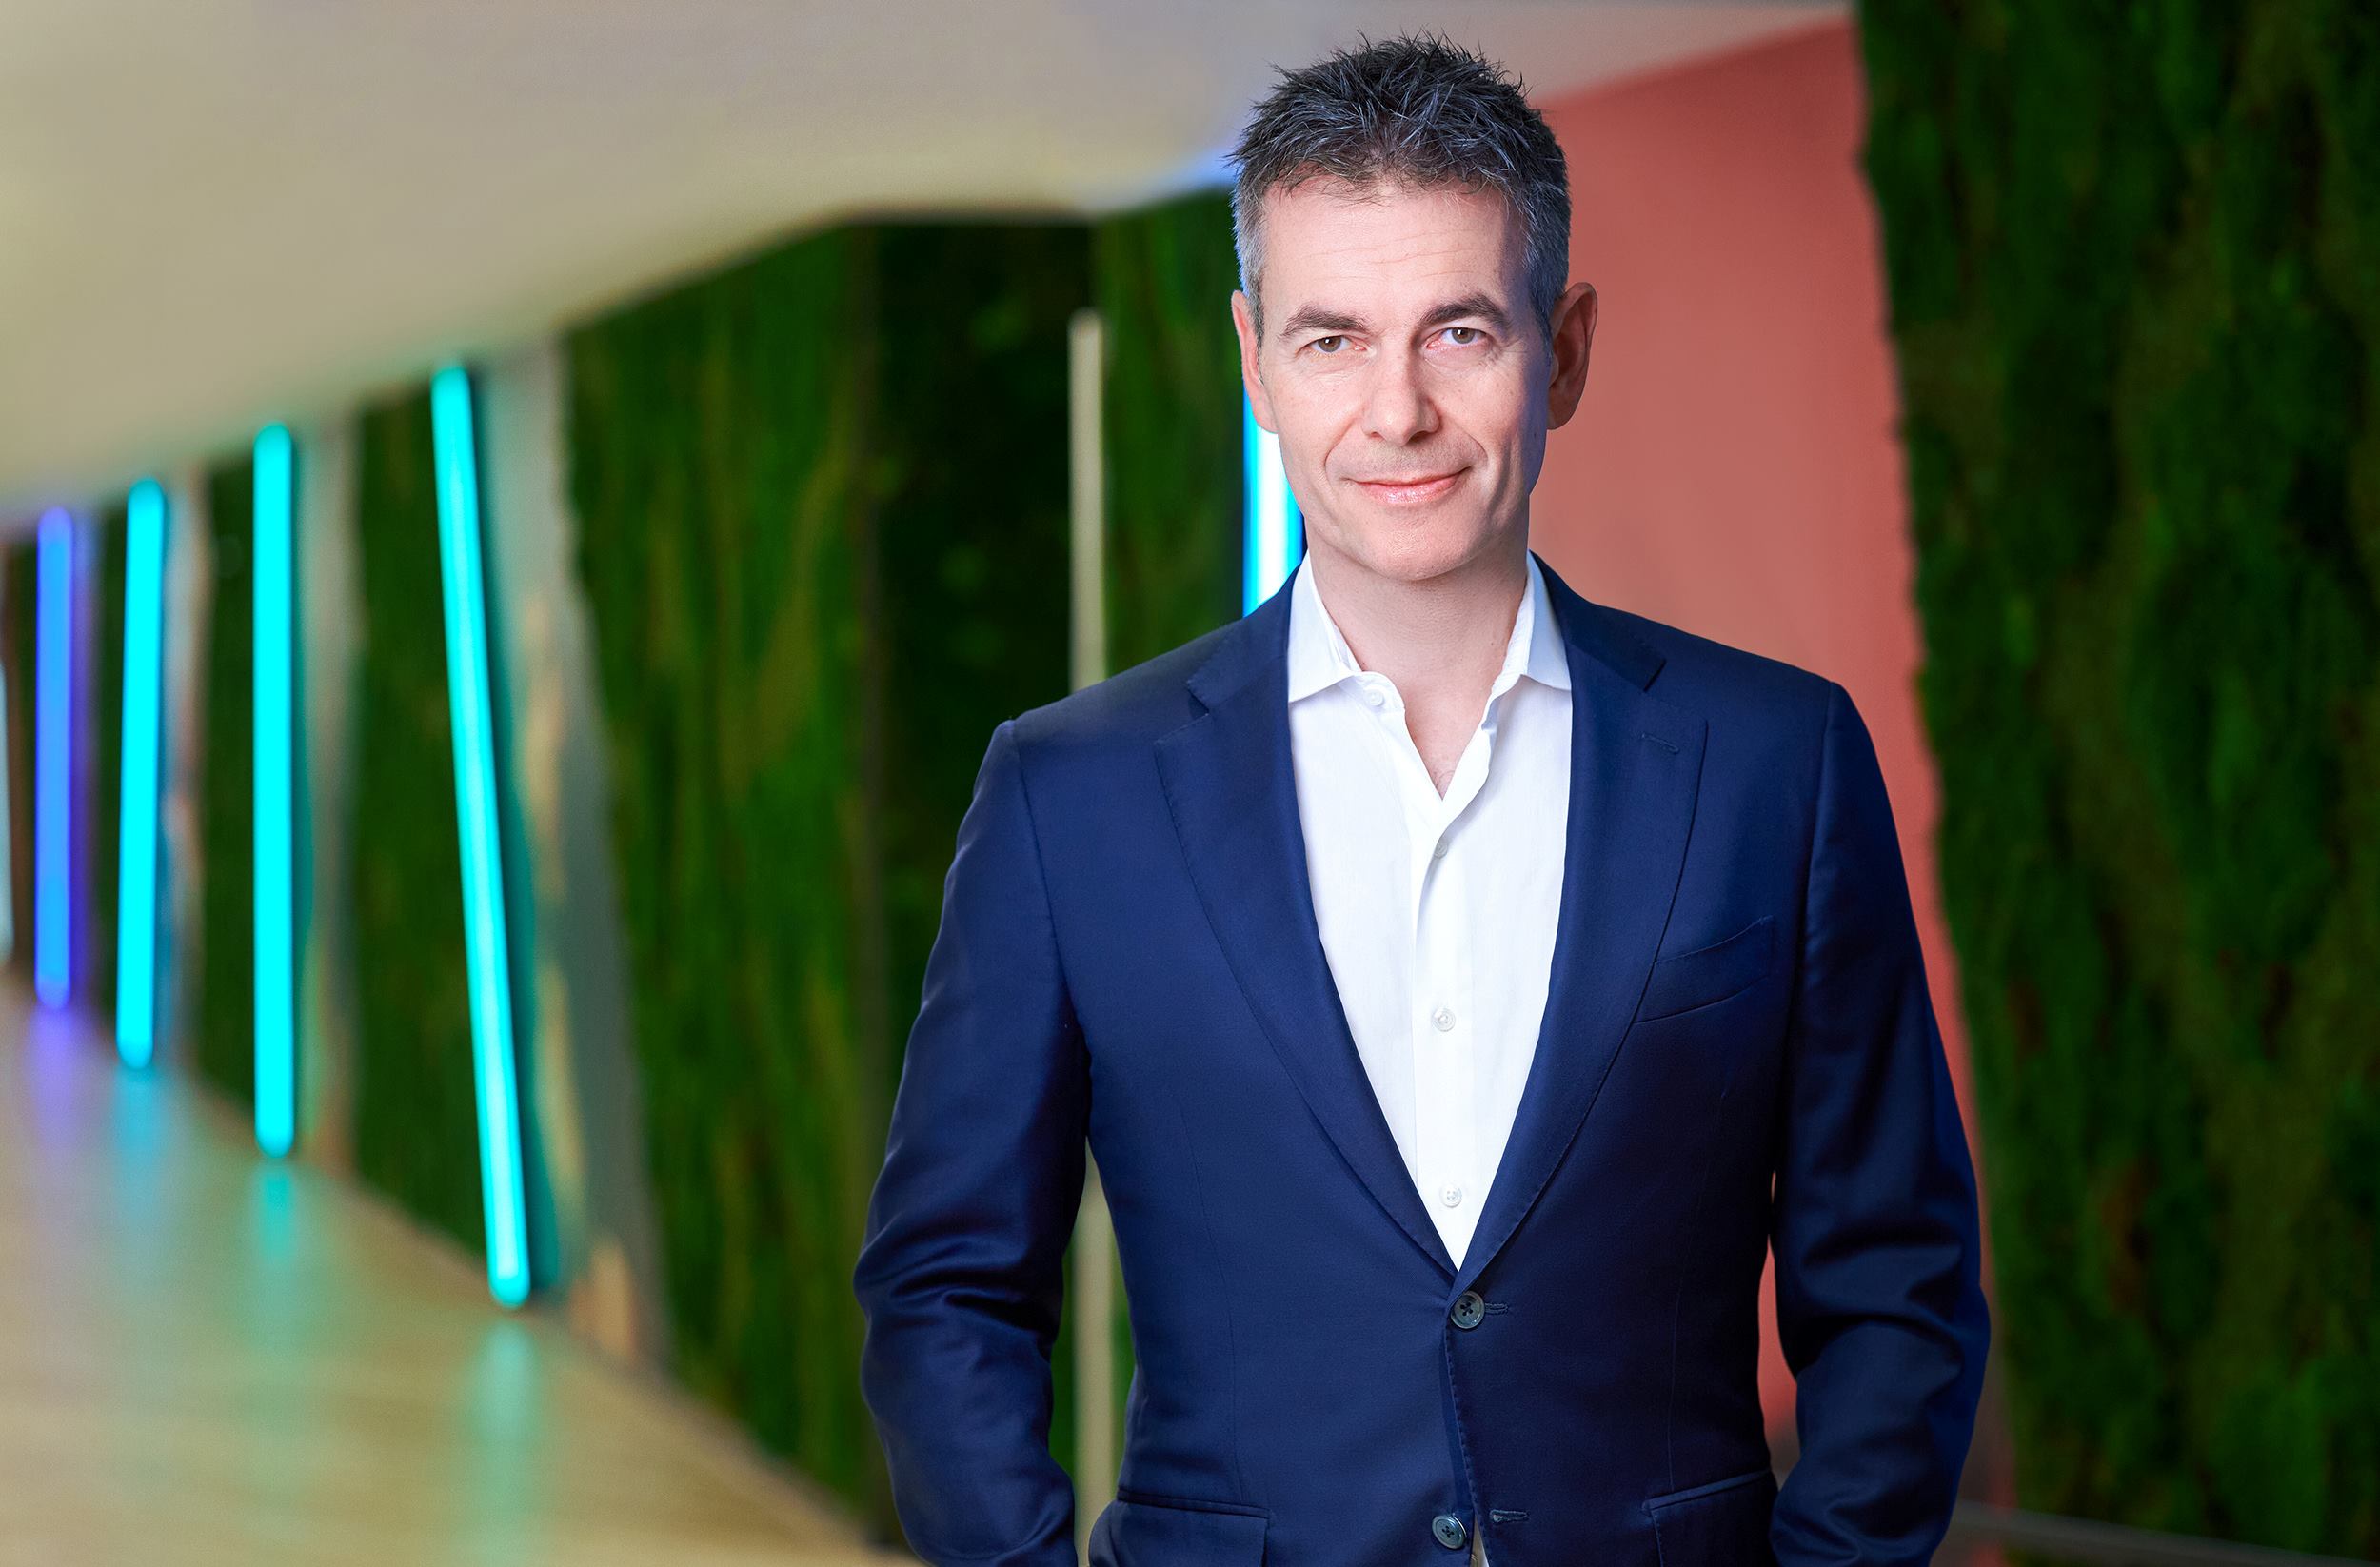 New AI Technologies Set To Revolutionize The Music Industry, Says Warner Music CEO